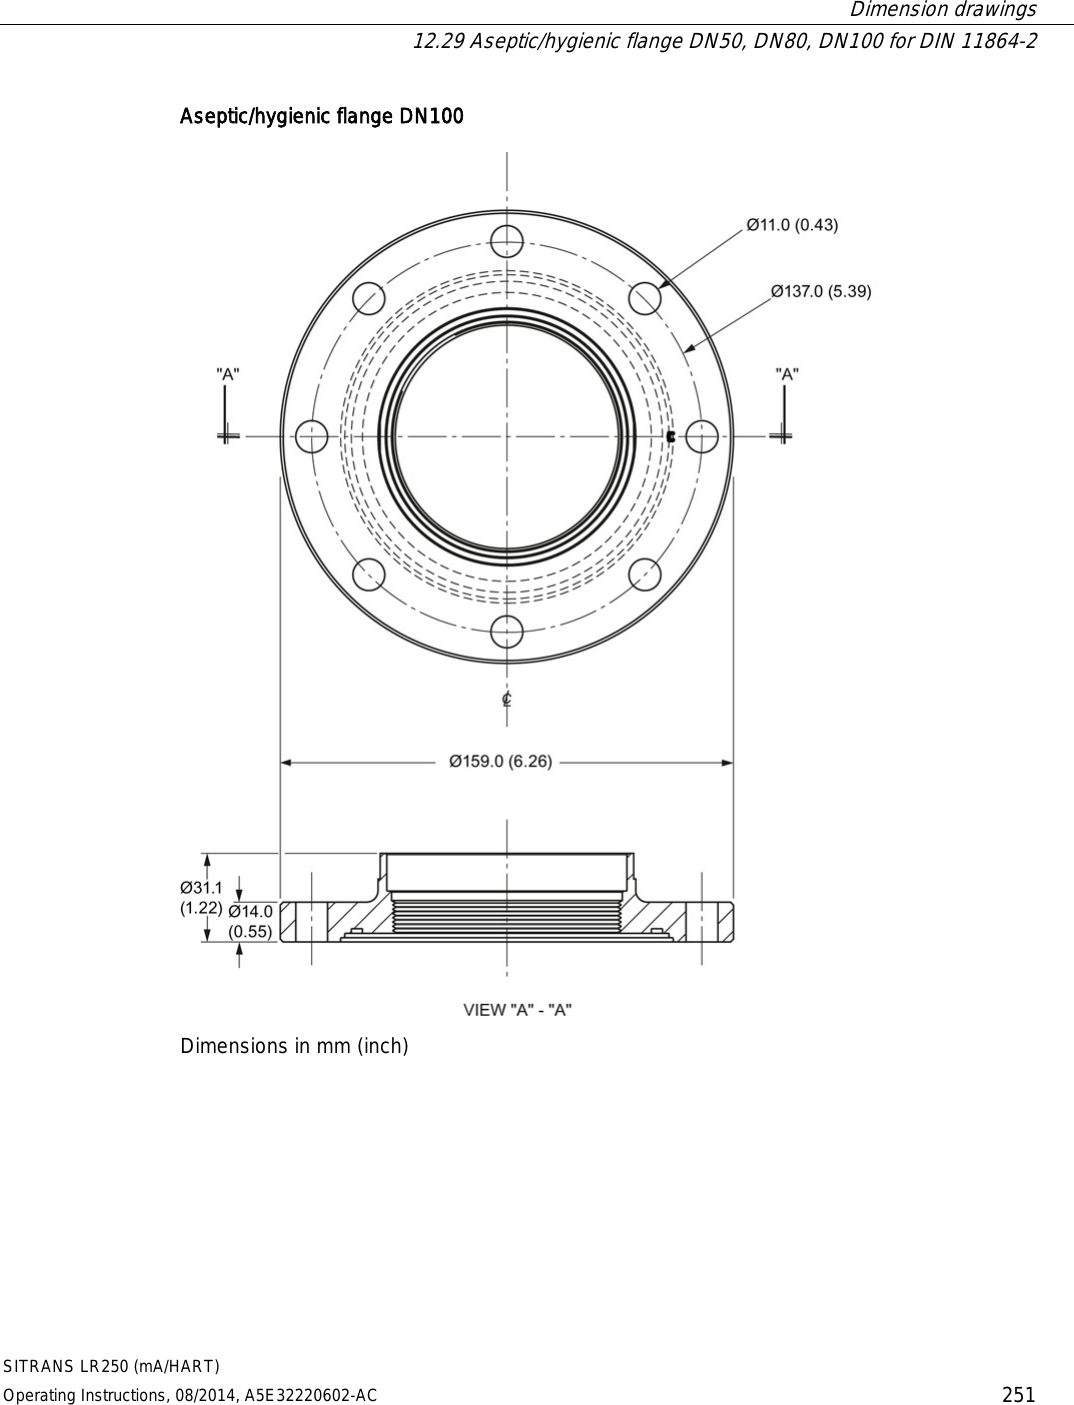  Dimension drawings  12.29 Aseptic/hygienic flange DN50, DN80, DN100 for DIN 11864-2 SITRANS LR250 (mA/HART) Operating Instructions, 08/2014, A5E32220602-AC 251 Aseptic/hygienic flange DN100  Dimensions in mm (inch) 